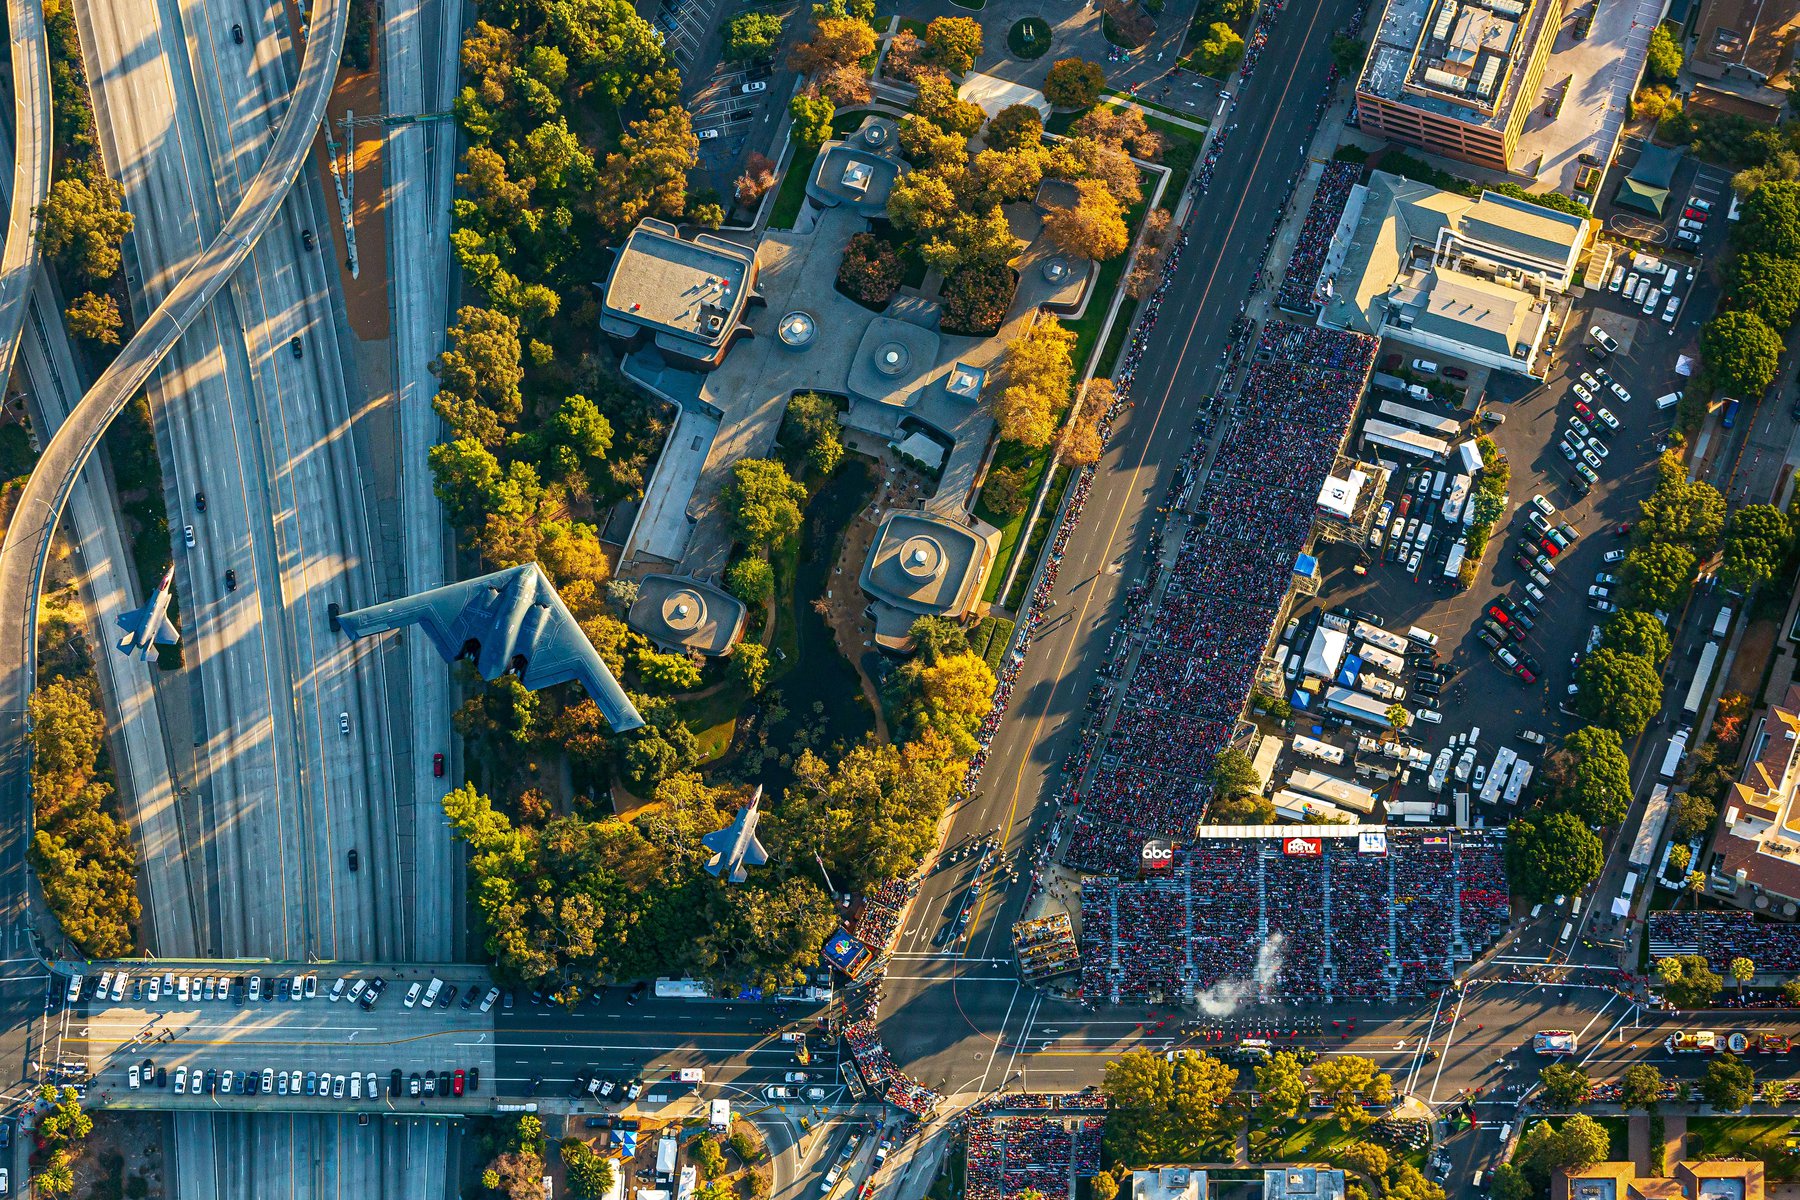 Mark Holtzman's Rose Parade Flyover Photo Featured in The Aviationist